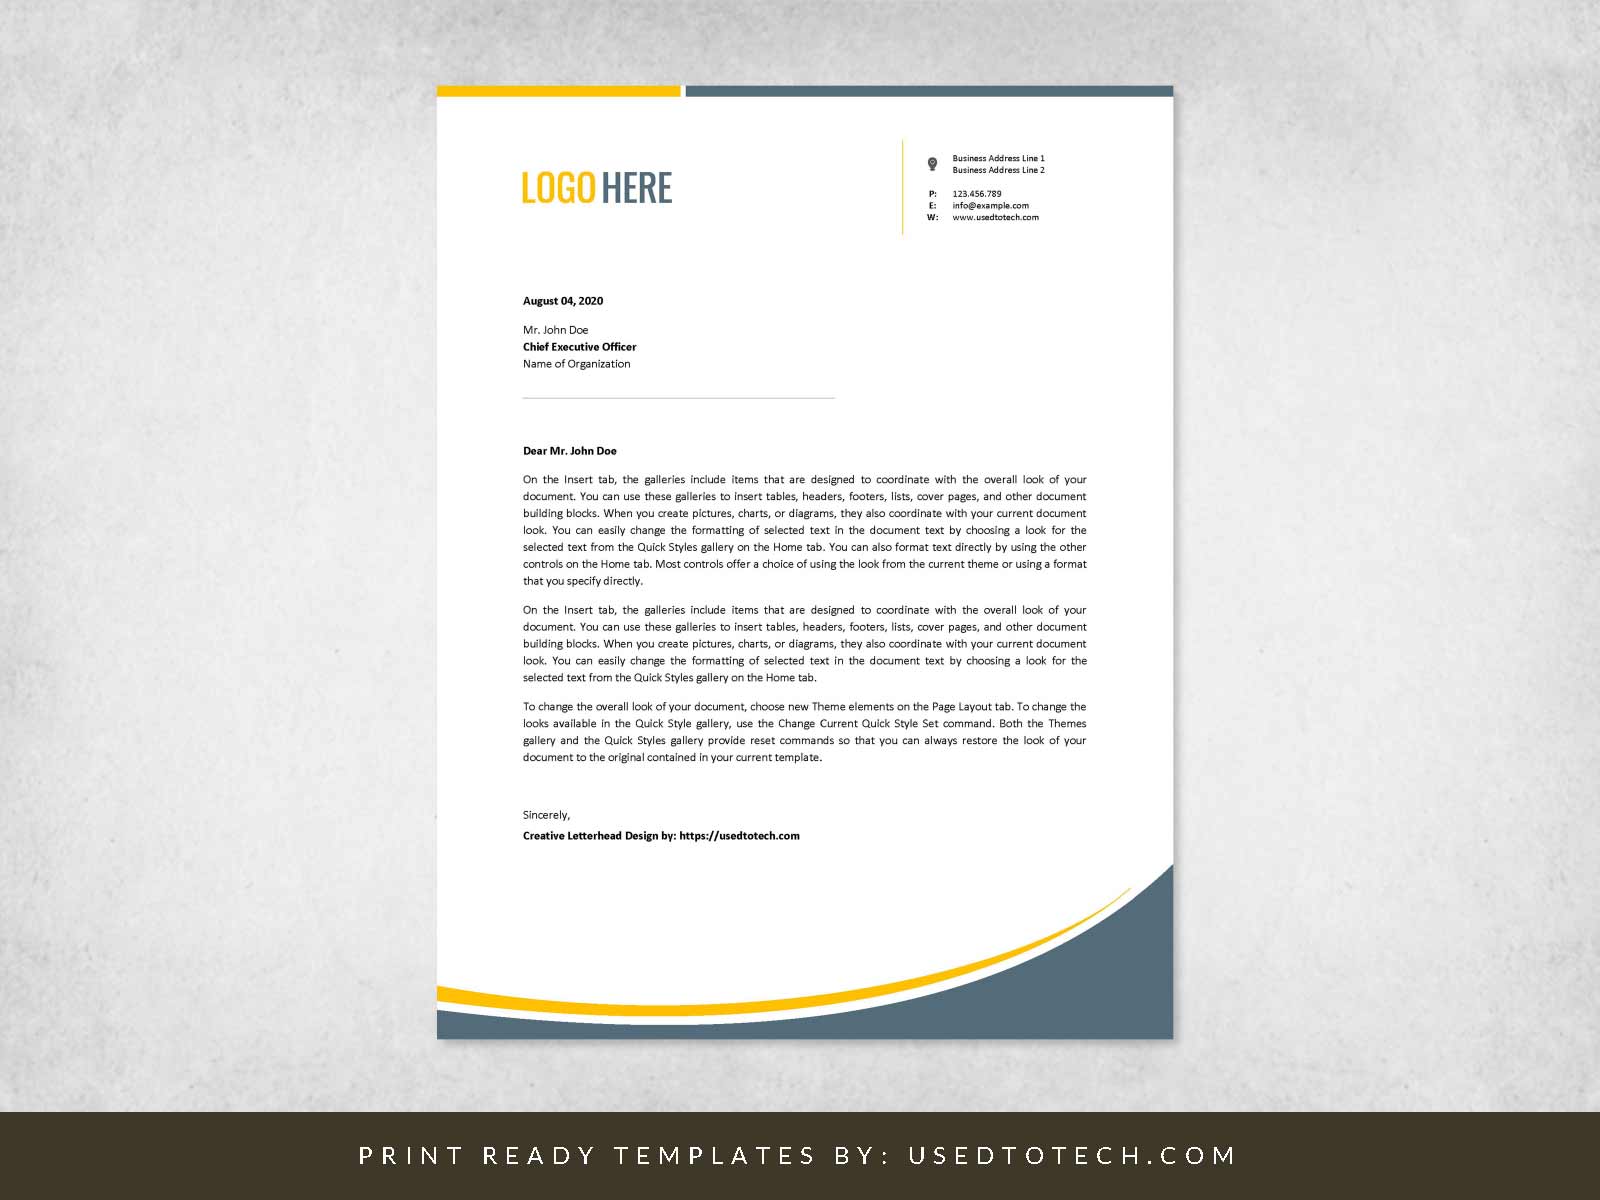 Word template for creative letterhead design - Used to Tech Pertaining To Header Templates For Word